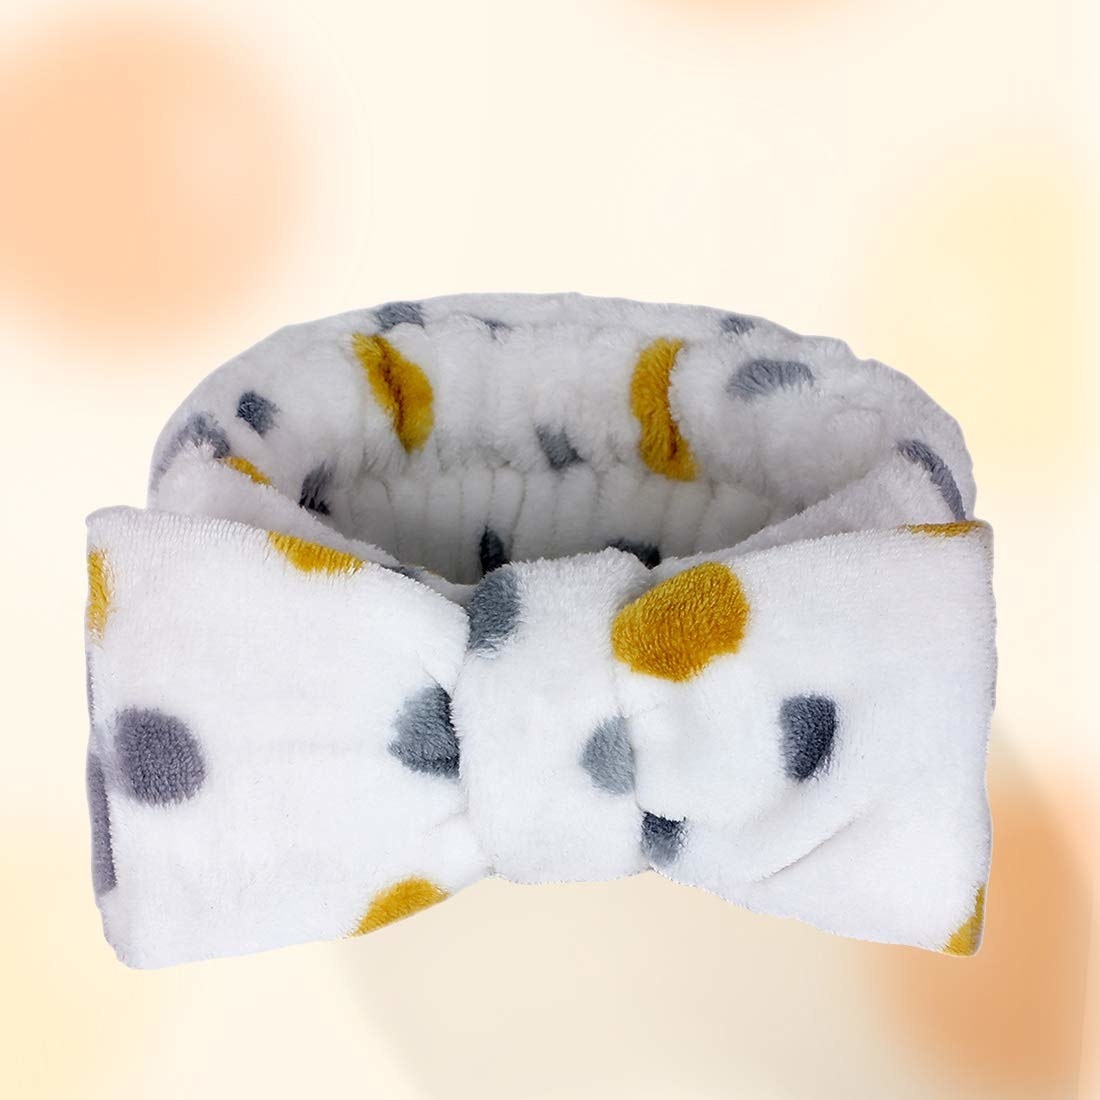 A white hair wrap band with a bow and yellow and grey polka dots on it